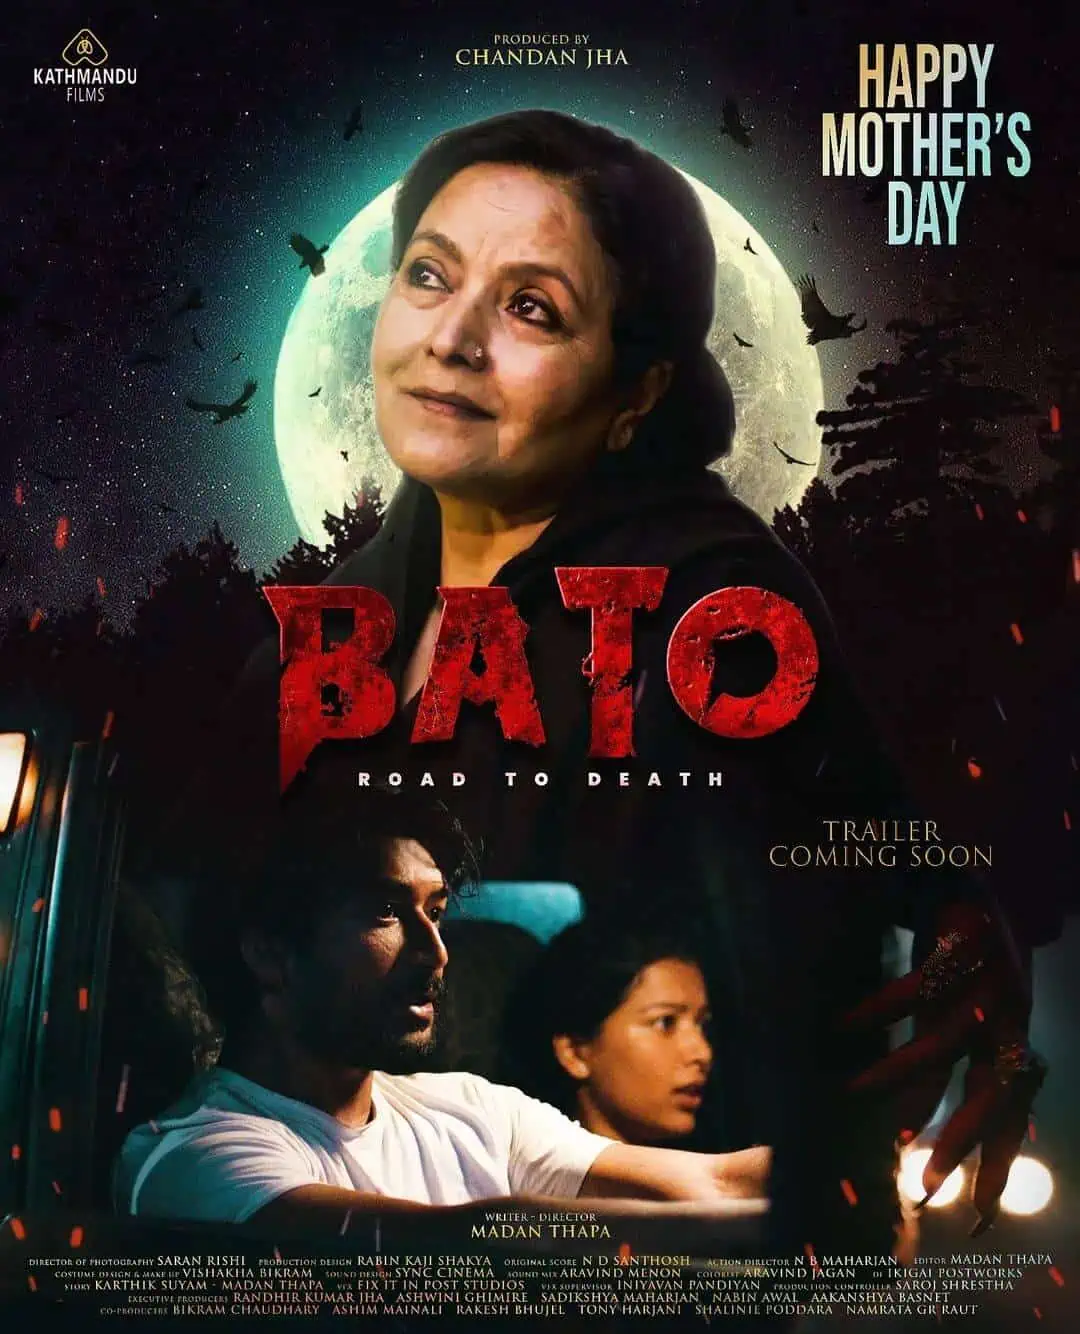 BATO - Road to Death Movie (2023) Cast, Release Date, Story, Budget, Collection, Poster, Trailer, Review